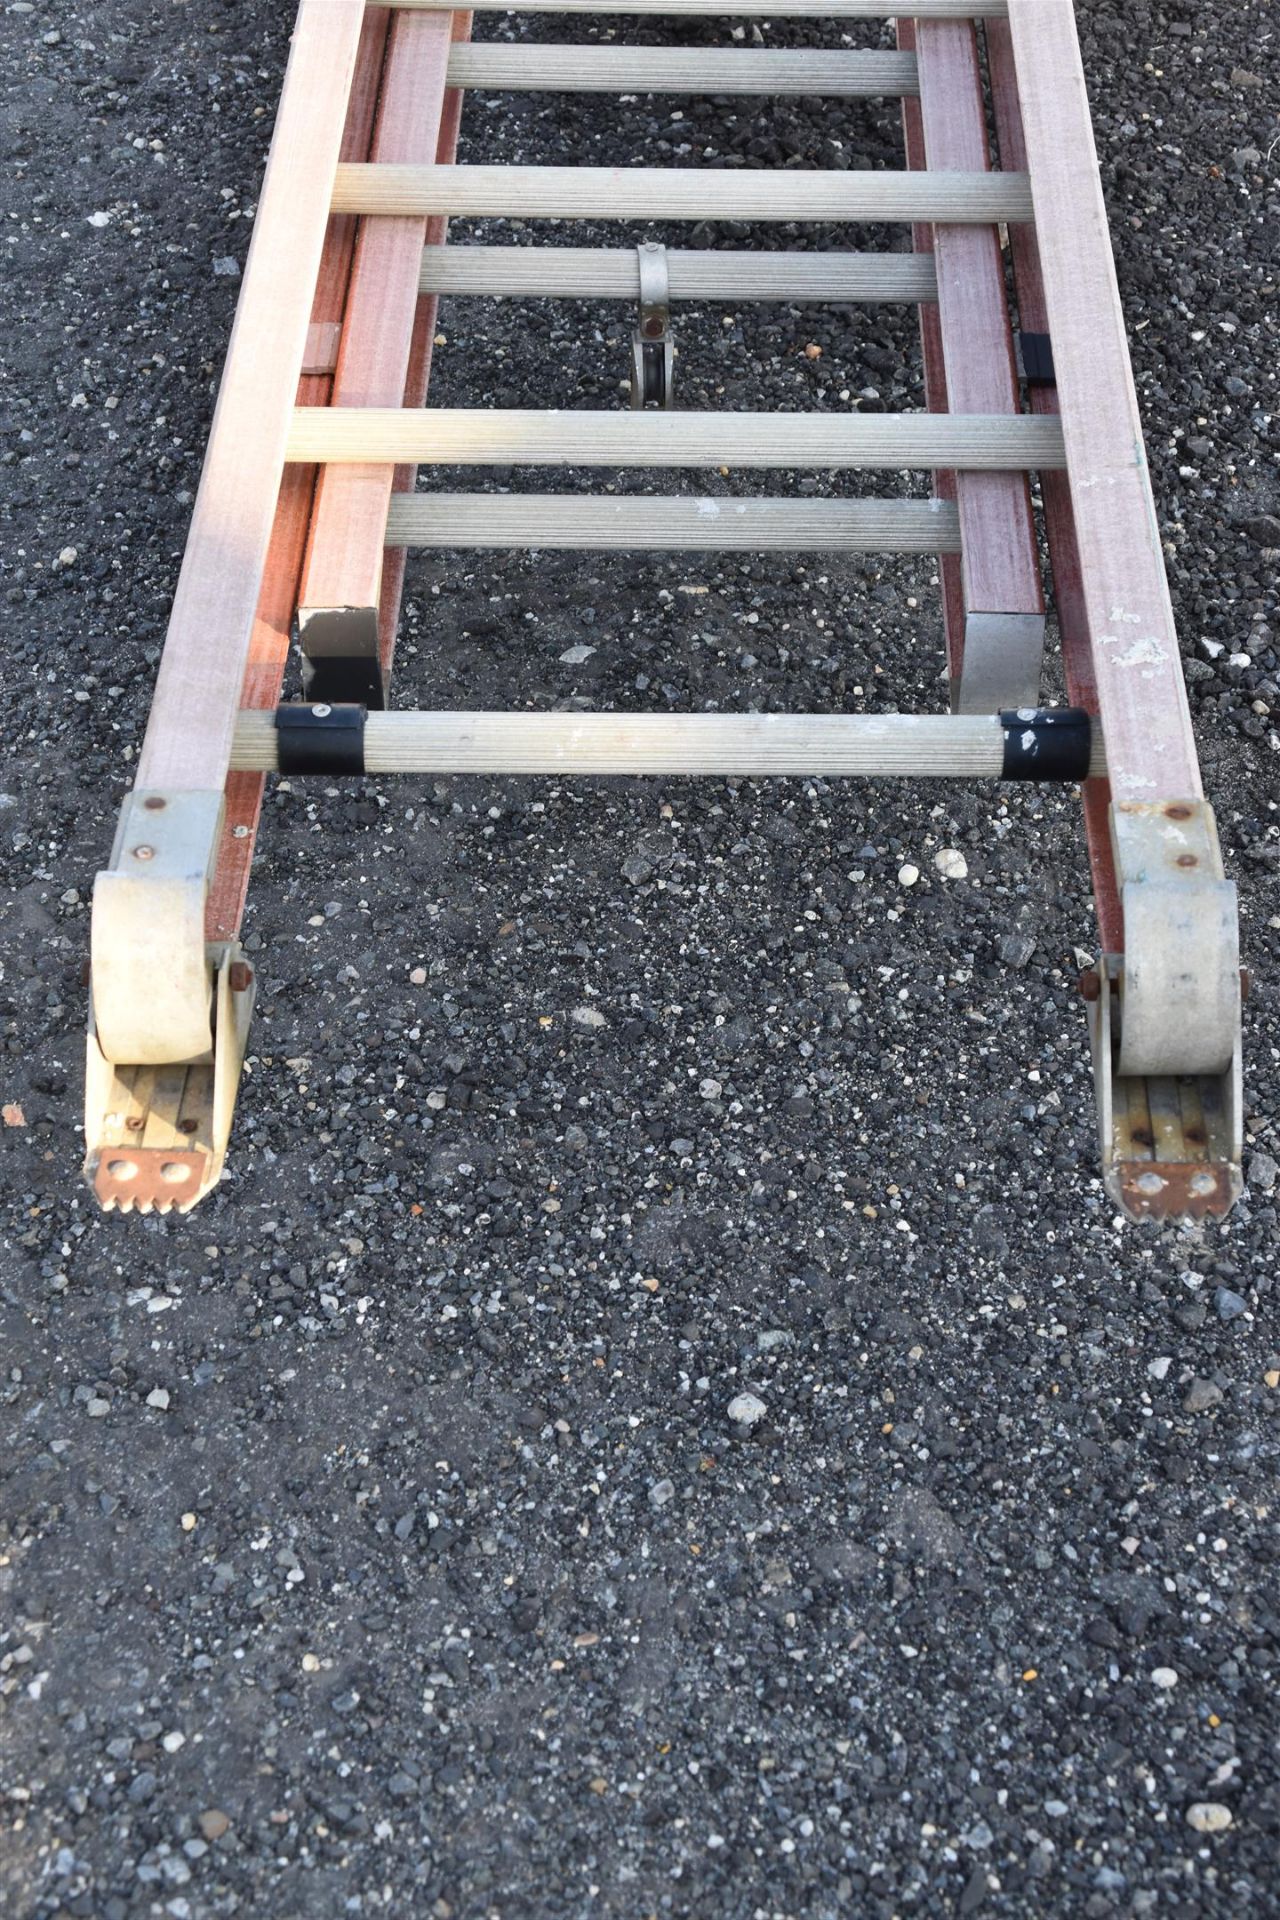 40 IN. Fiberglass Extension Ladder - Image 4 of 5